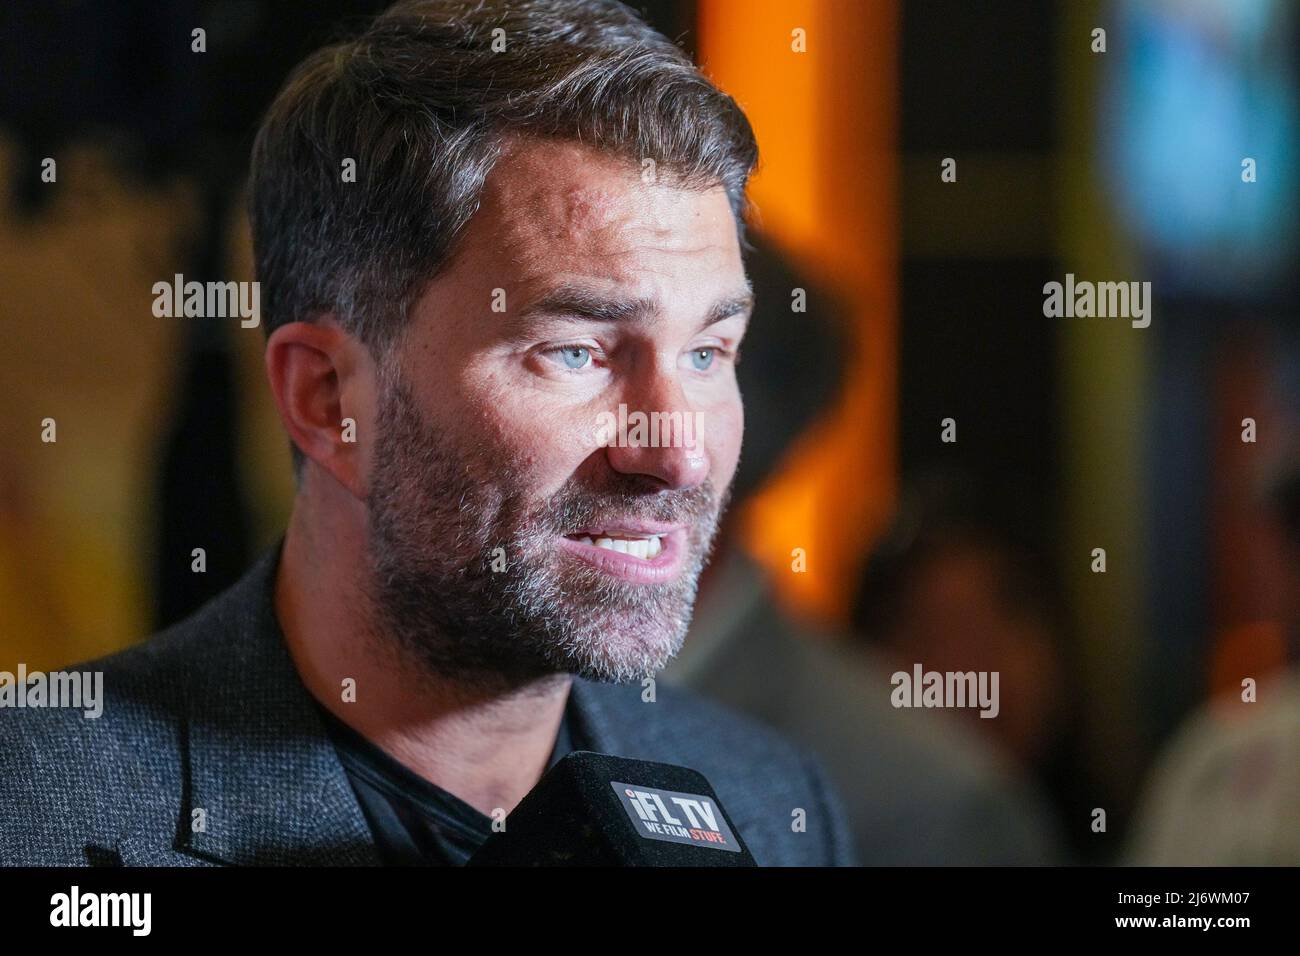 LAS VEGAS, NV - May 3: Eddie Hearn, the promoter of the event meets with the press following the face-off at MGM Grand for CANELO ALVAREZ VS. DMITRY BIVOL : Grand Arrivals on May 3, 2022 in Las Vegas, United States. (Photo by Louis Grasse/PxImages) Stock Photo